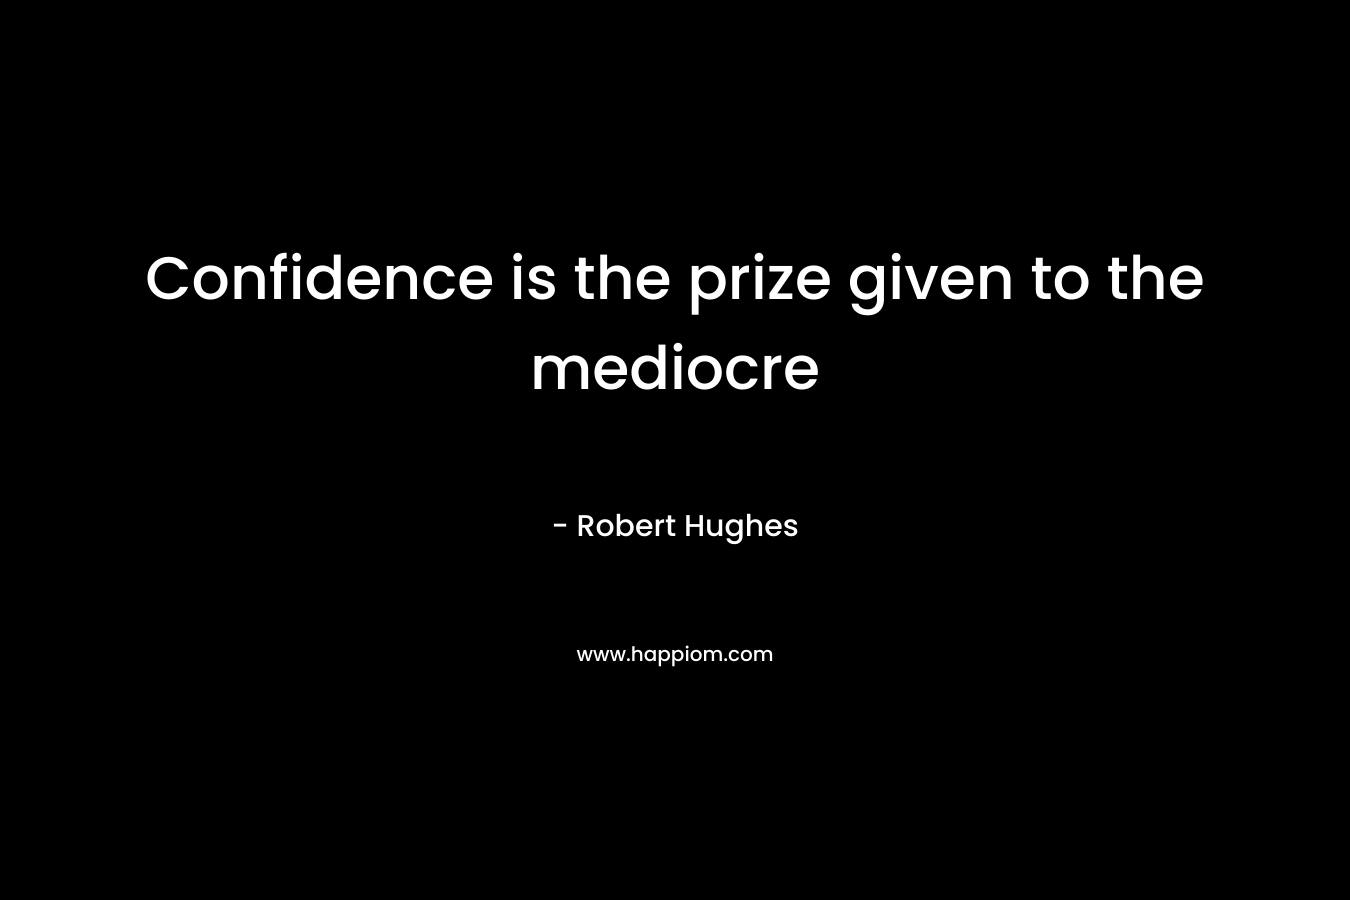 Confidence is the prize given to the mediocre